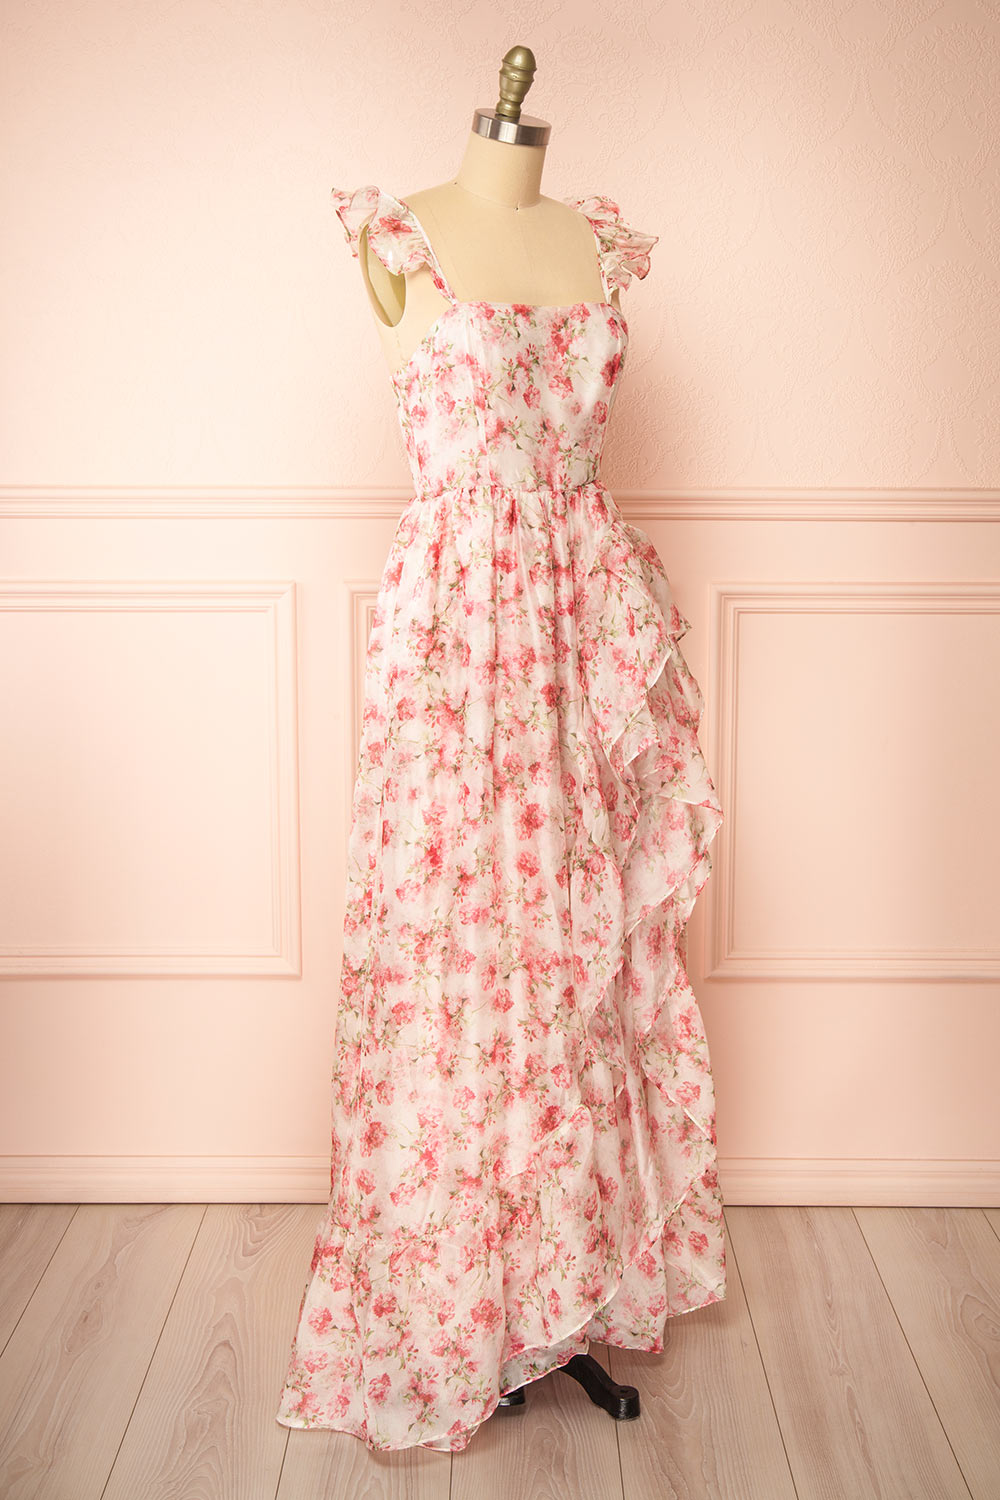 Phyllisia Pink Floral Maxi Dress w/ Ruffles | Boutique 1861 side view